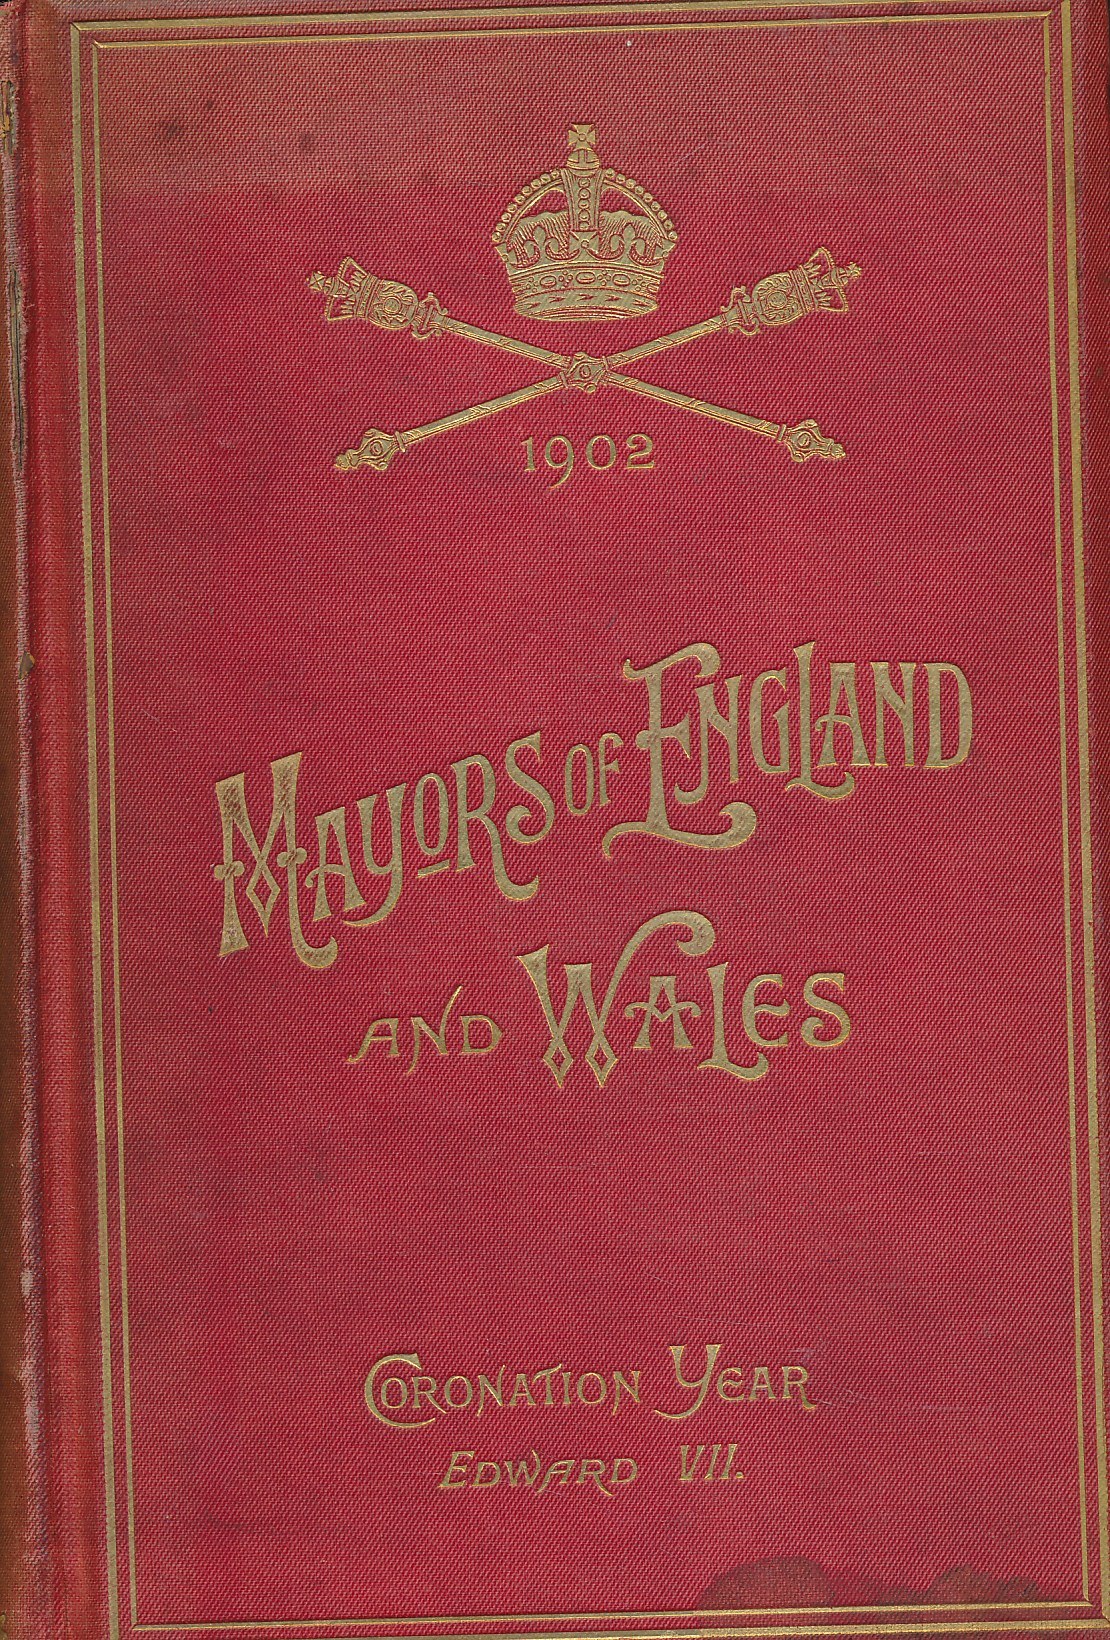 The Mayors of England & Wales [With Portraits of Mayors and Mayoresses]. 1902.